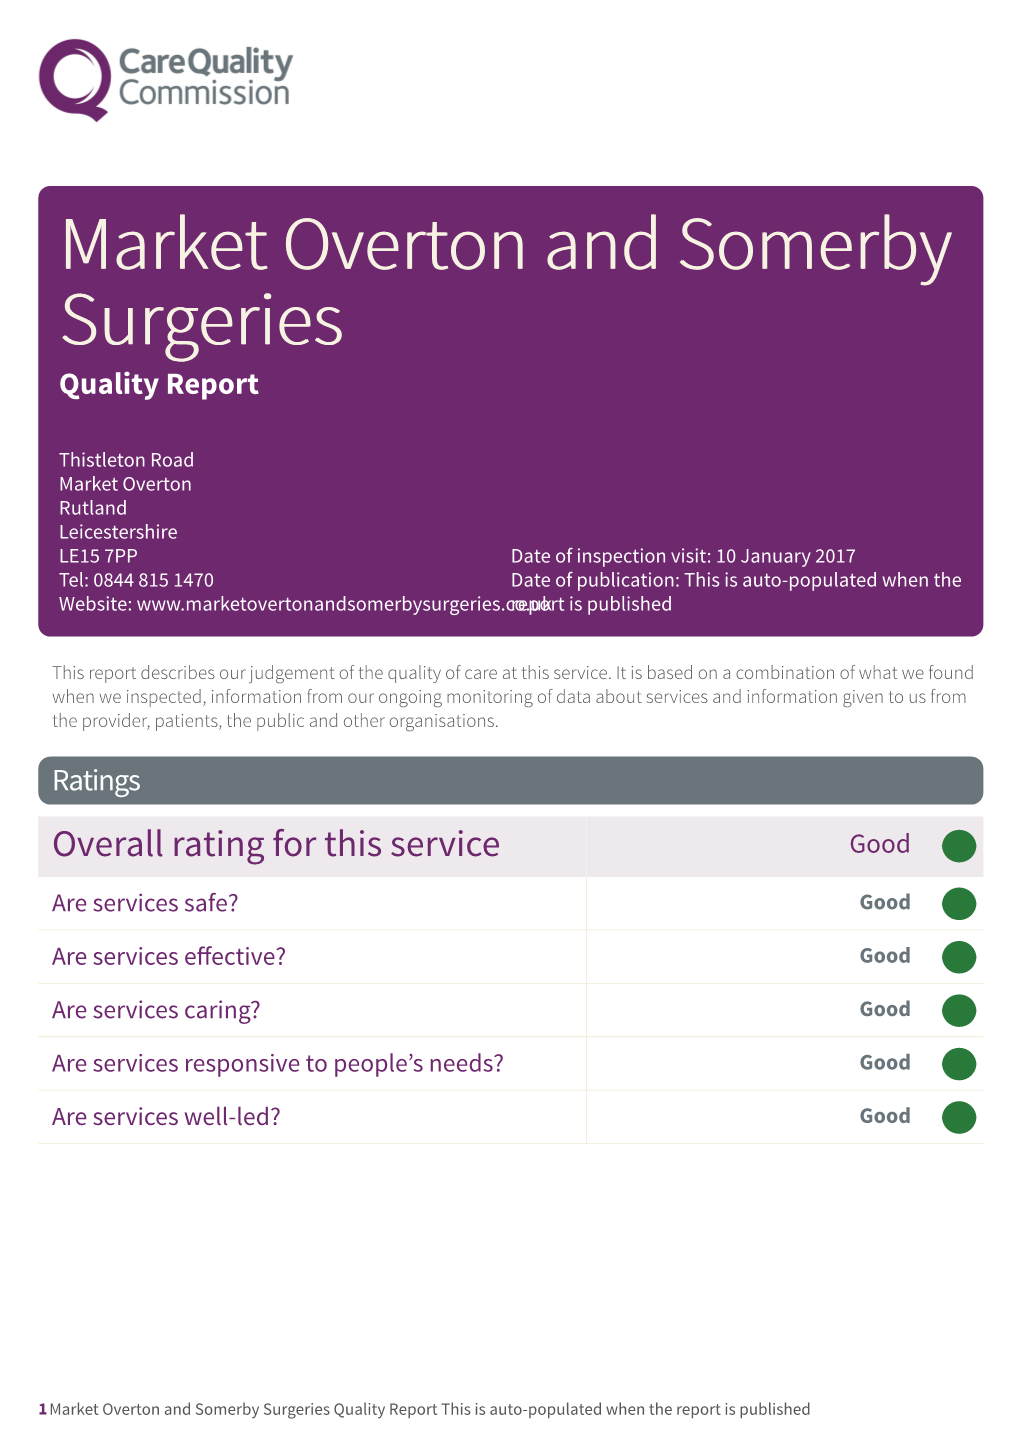 Market Overton and Somerby Surgeries Newapproachcomprehensive Report (Gppractices Location Jan 2017) INS1-586582292